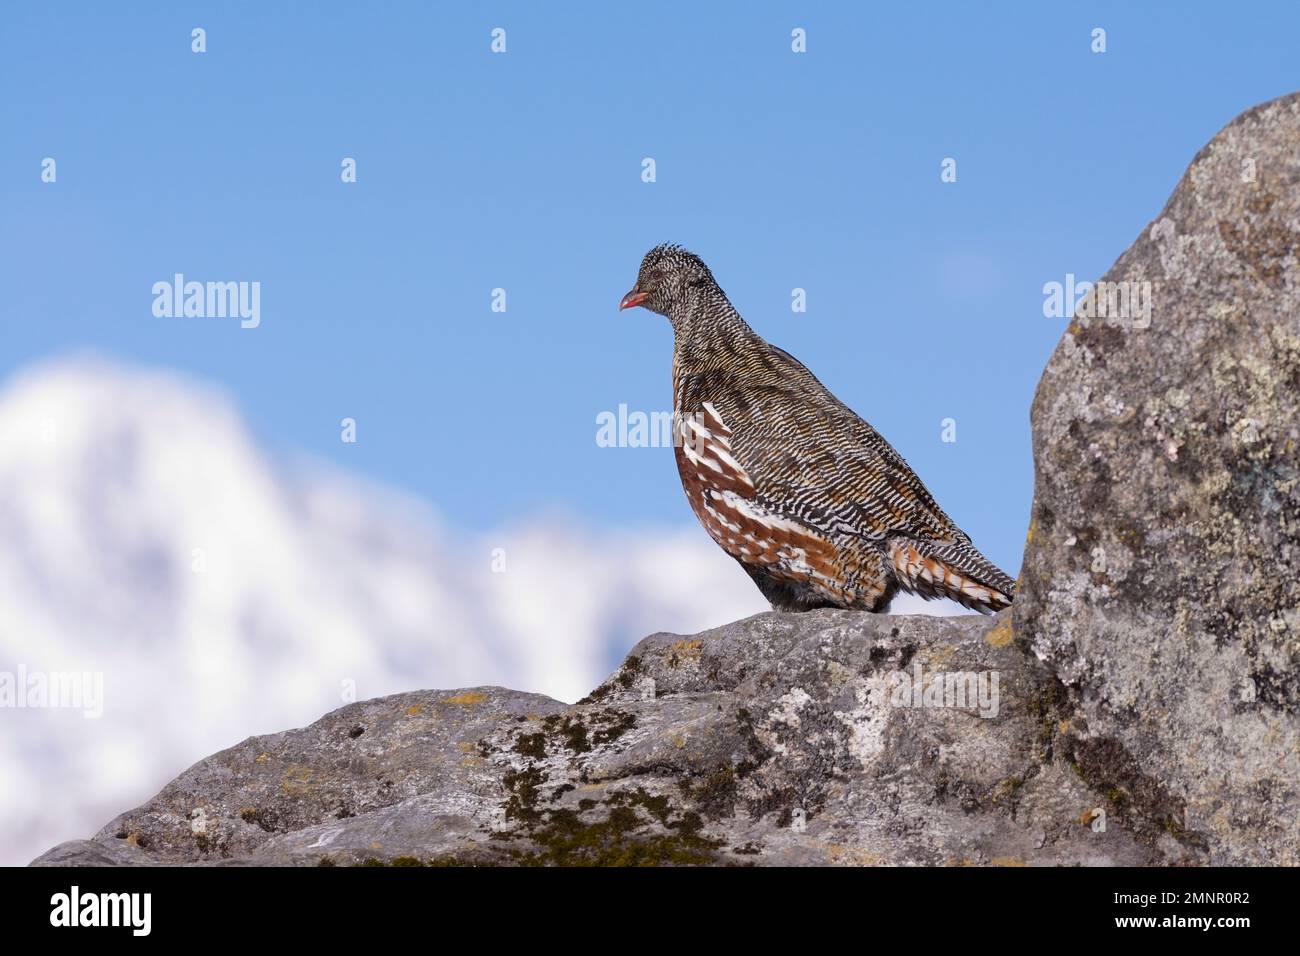 Snow Partridge (Lerwa lerwa) perched on a rock with mountains in background Stock Photo